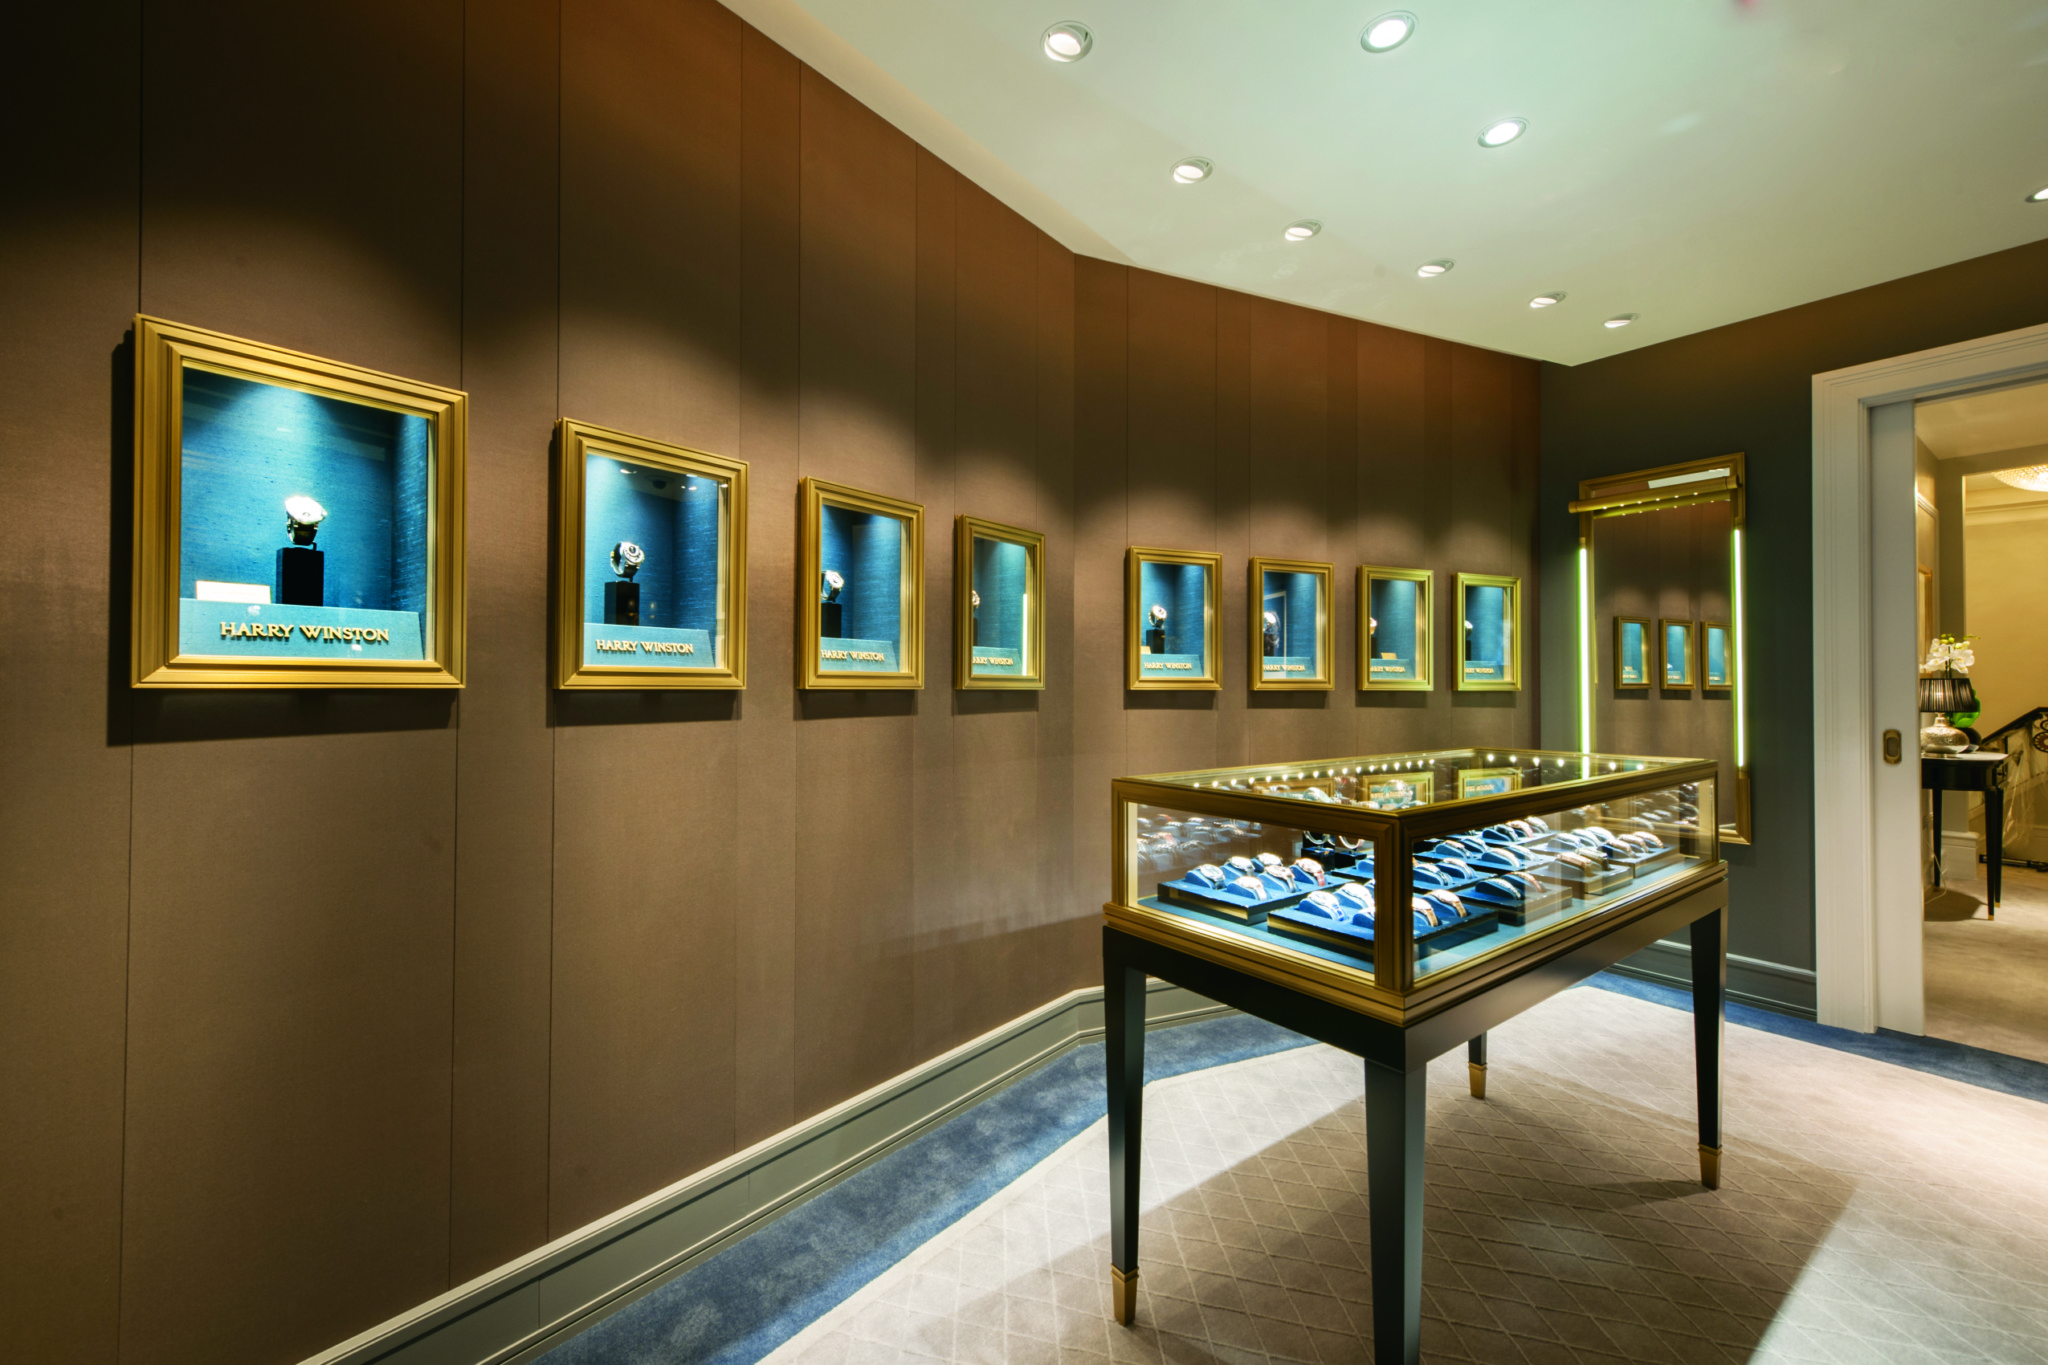 Harry winston has an entire floor dedicated to watches at its newly refurbished bond street boutique.